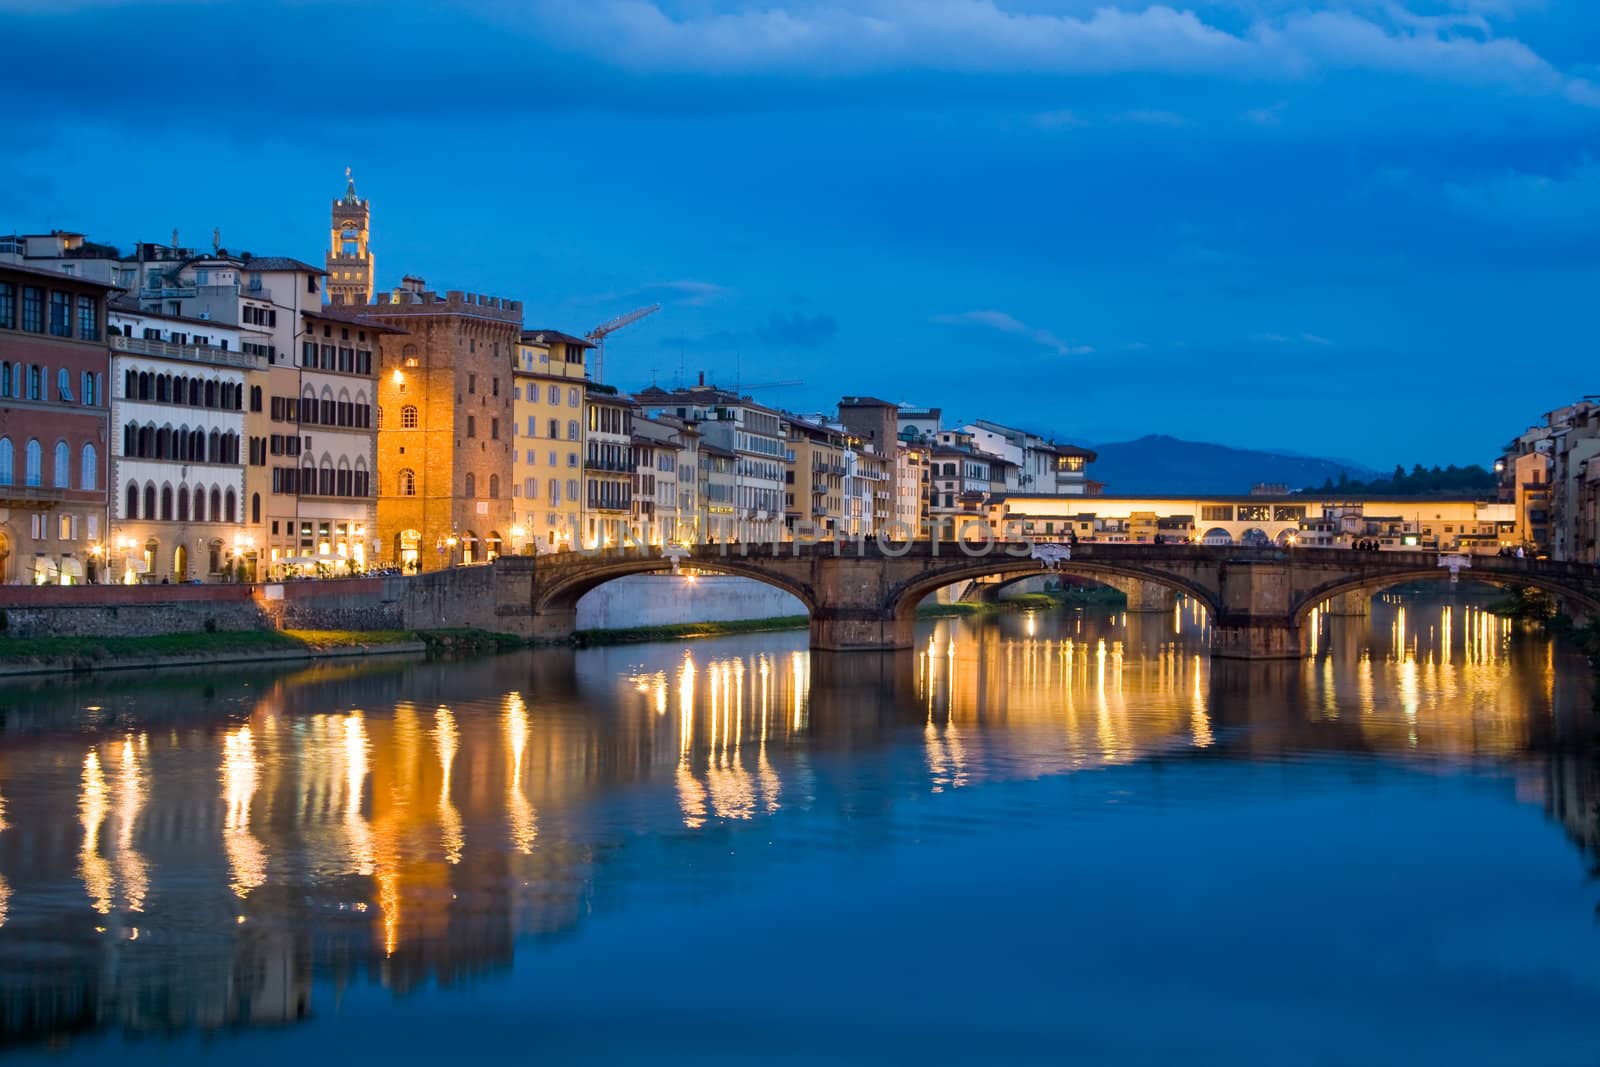 Ancient buildings and old bridge reflecting in River Arno in Florence, Italy
